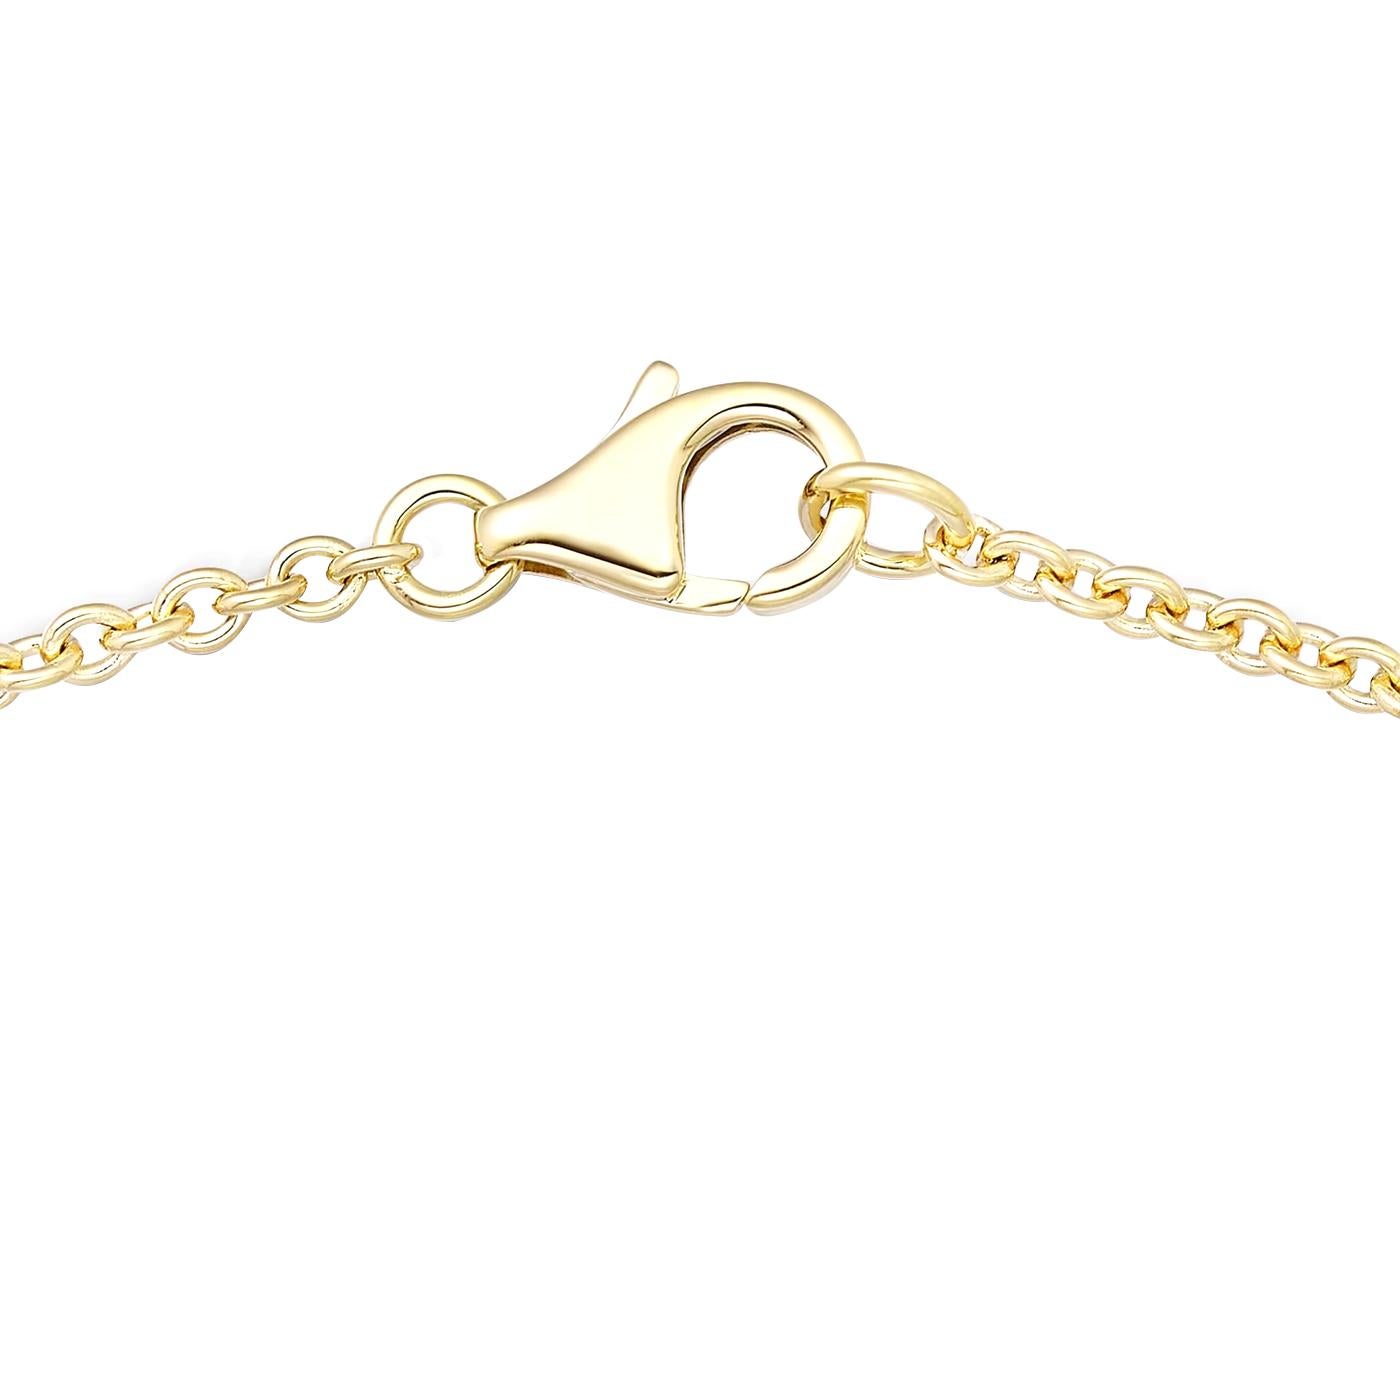 Modernist Cartier Love Necklace 18K Yellow Gold 17.3 Inches Long For Sale